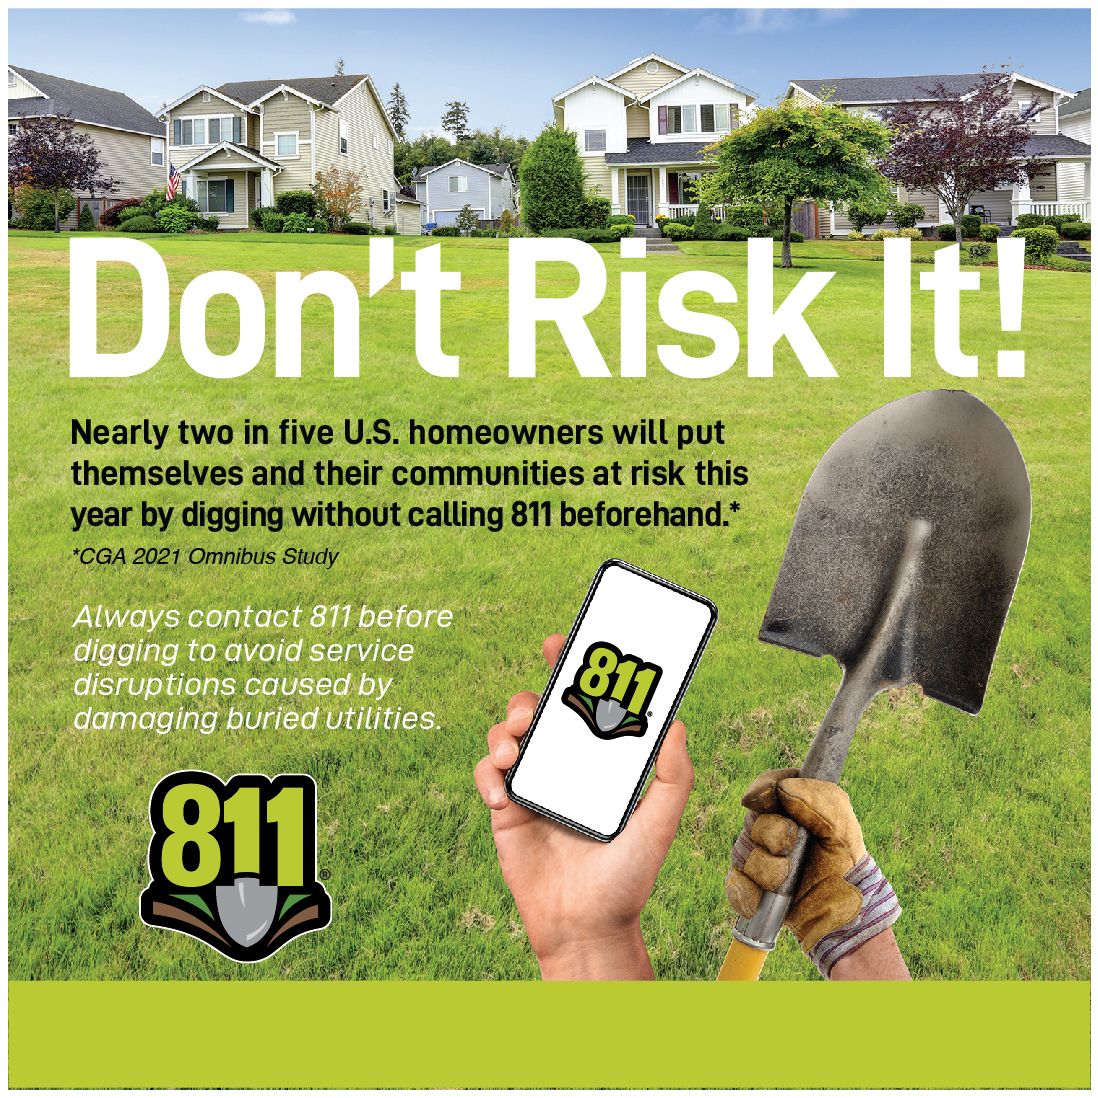 April is Safe Digging Month. Before you put a shovel in the ground, call @MISSDIG811 to have buried utilities marked for safety. It's the law.